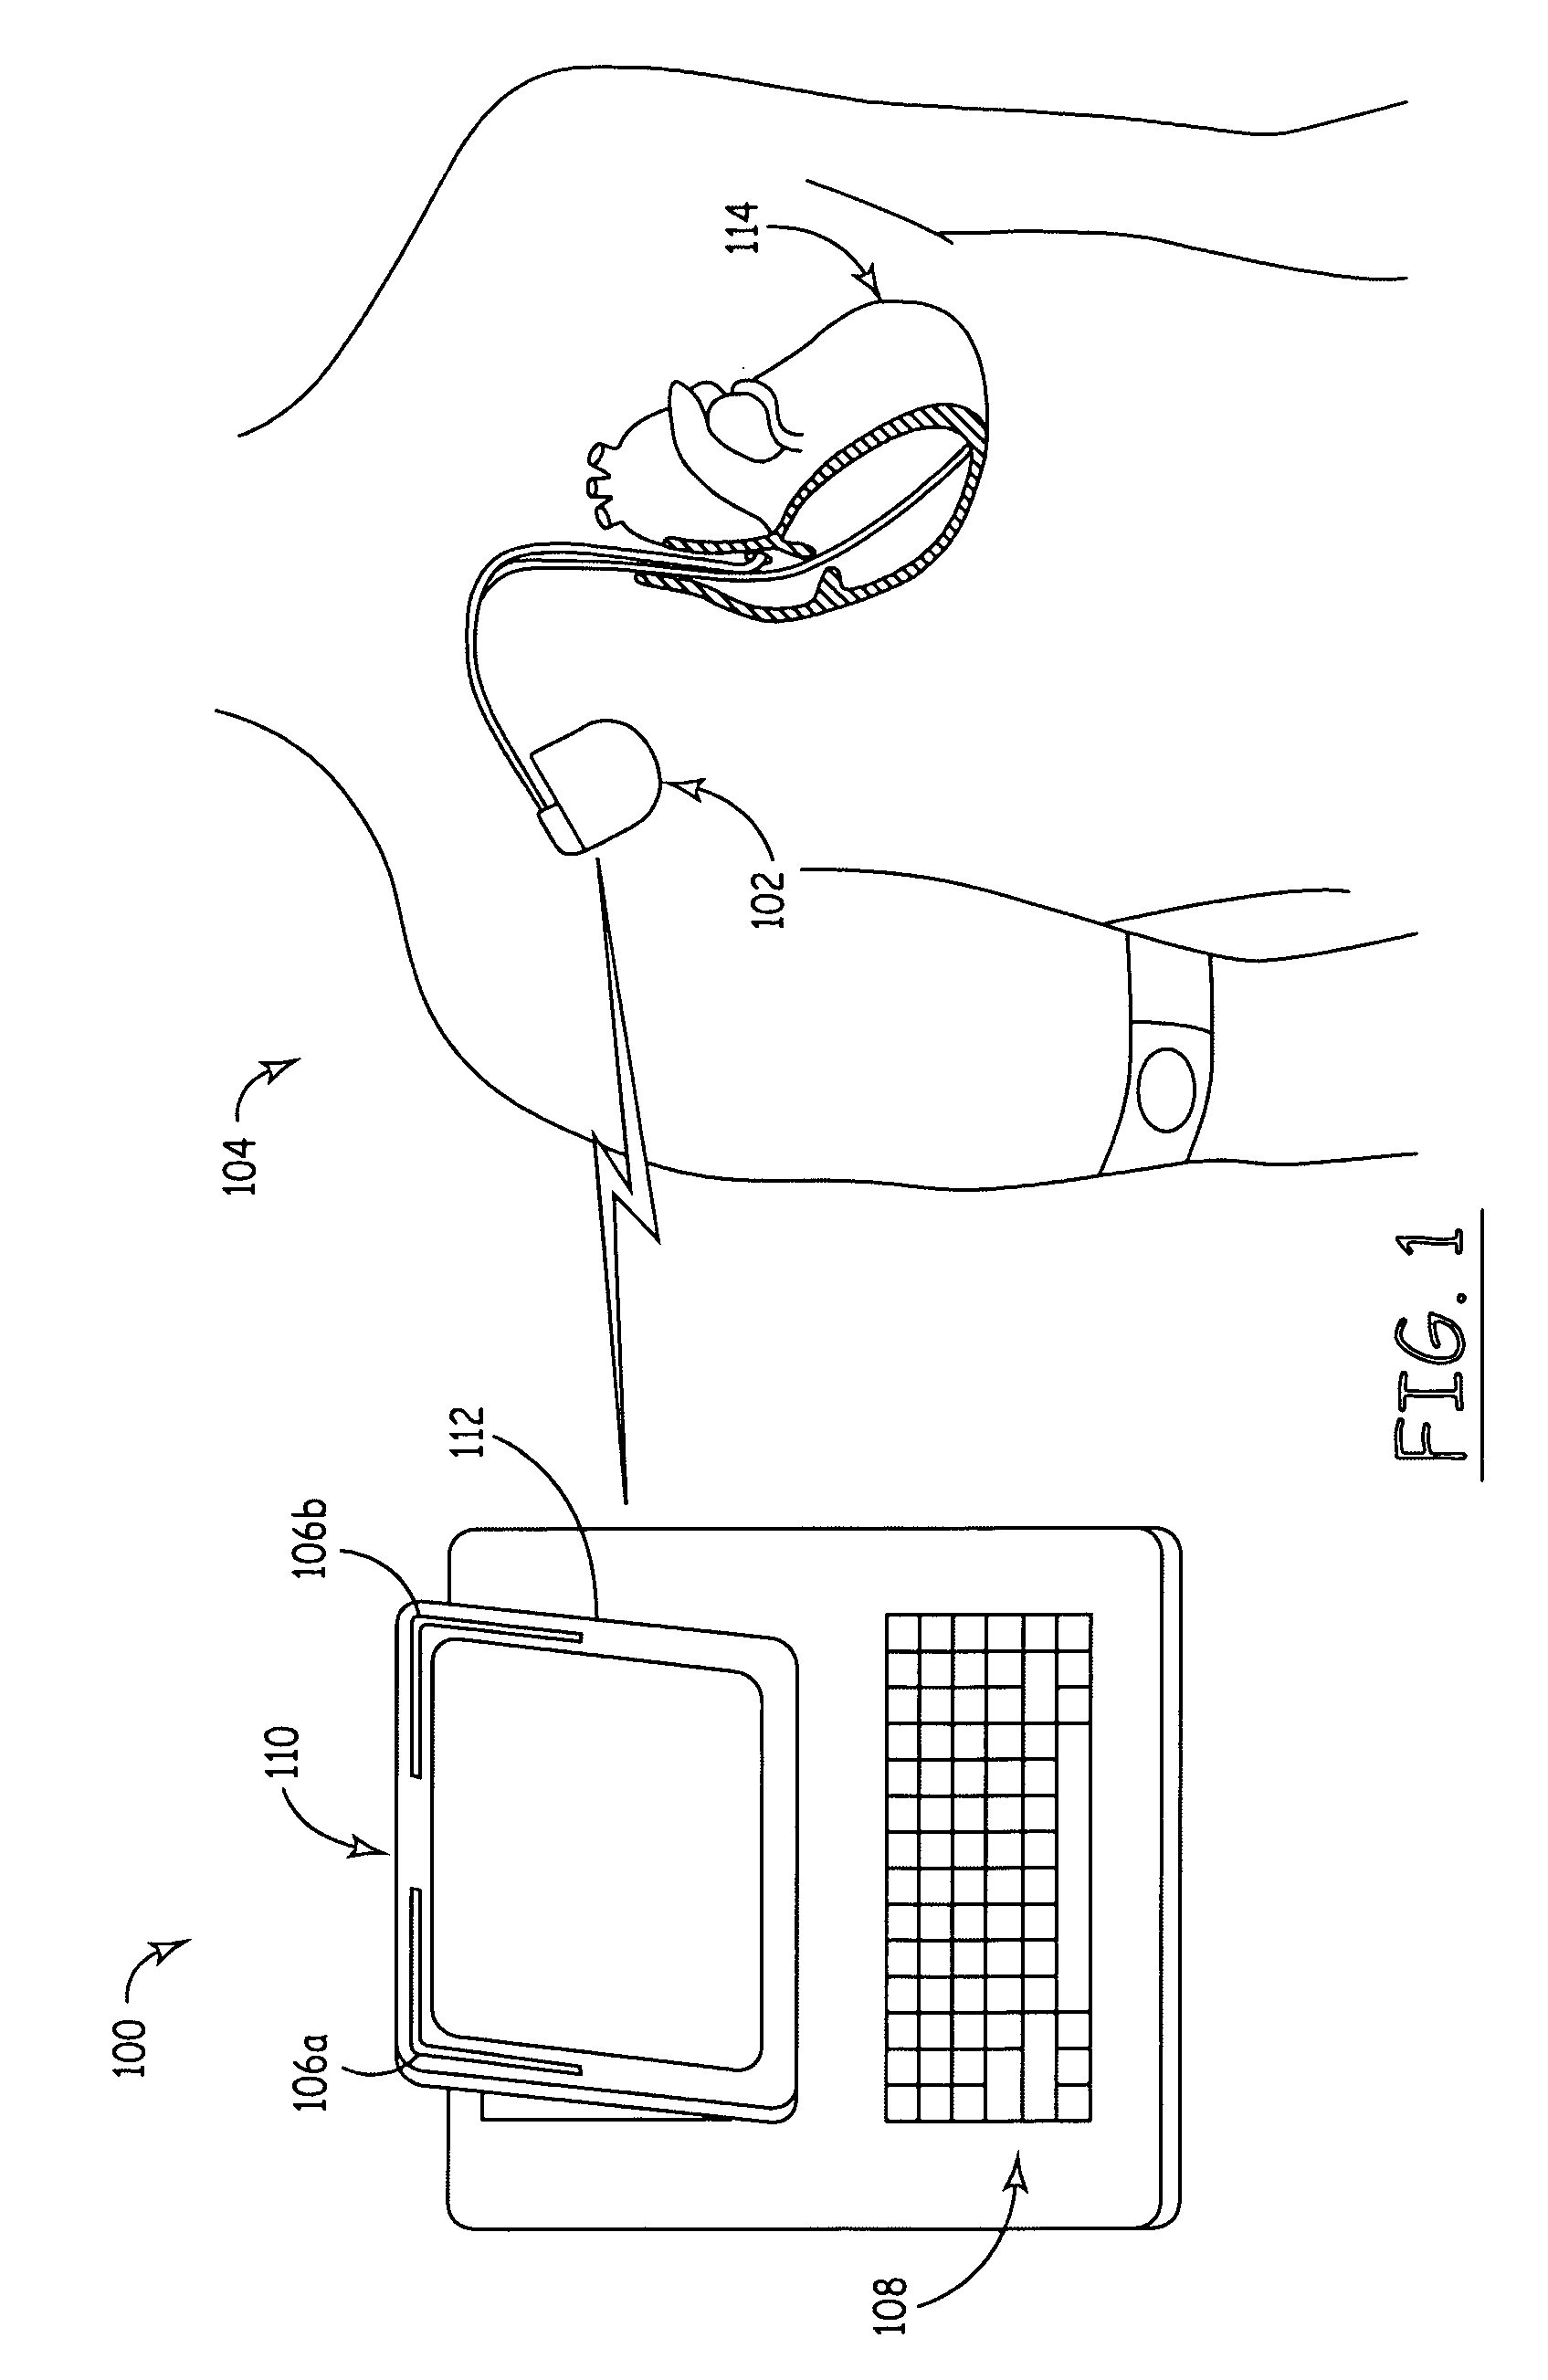 Compact conformal antenna for an implanted medical device telemetry system